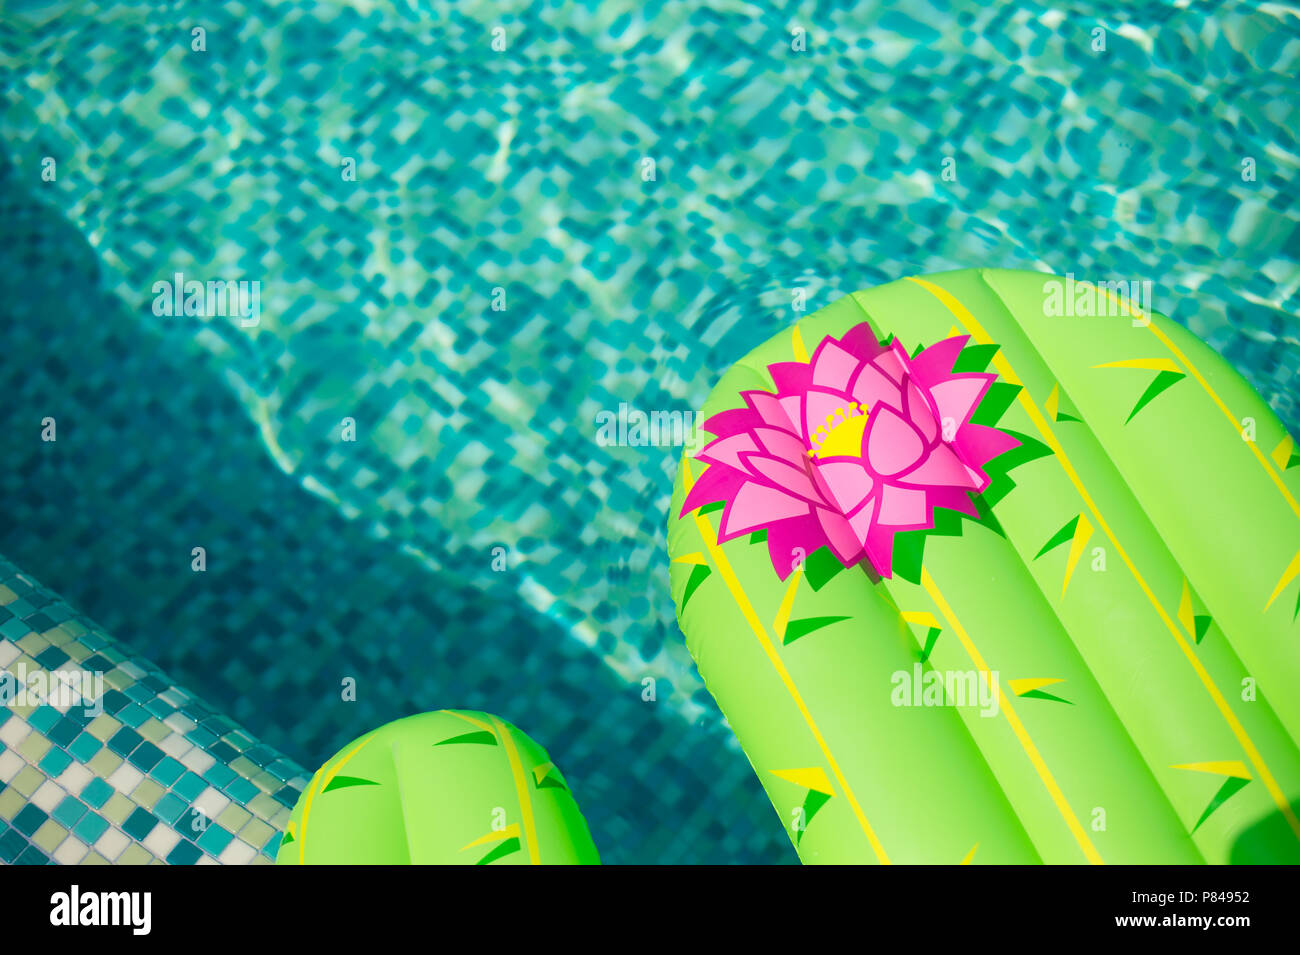 Colorful inflated cactus floating in a refreshing blue swimming pool Stock Photo